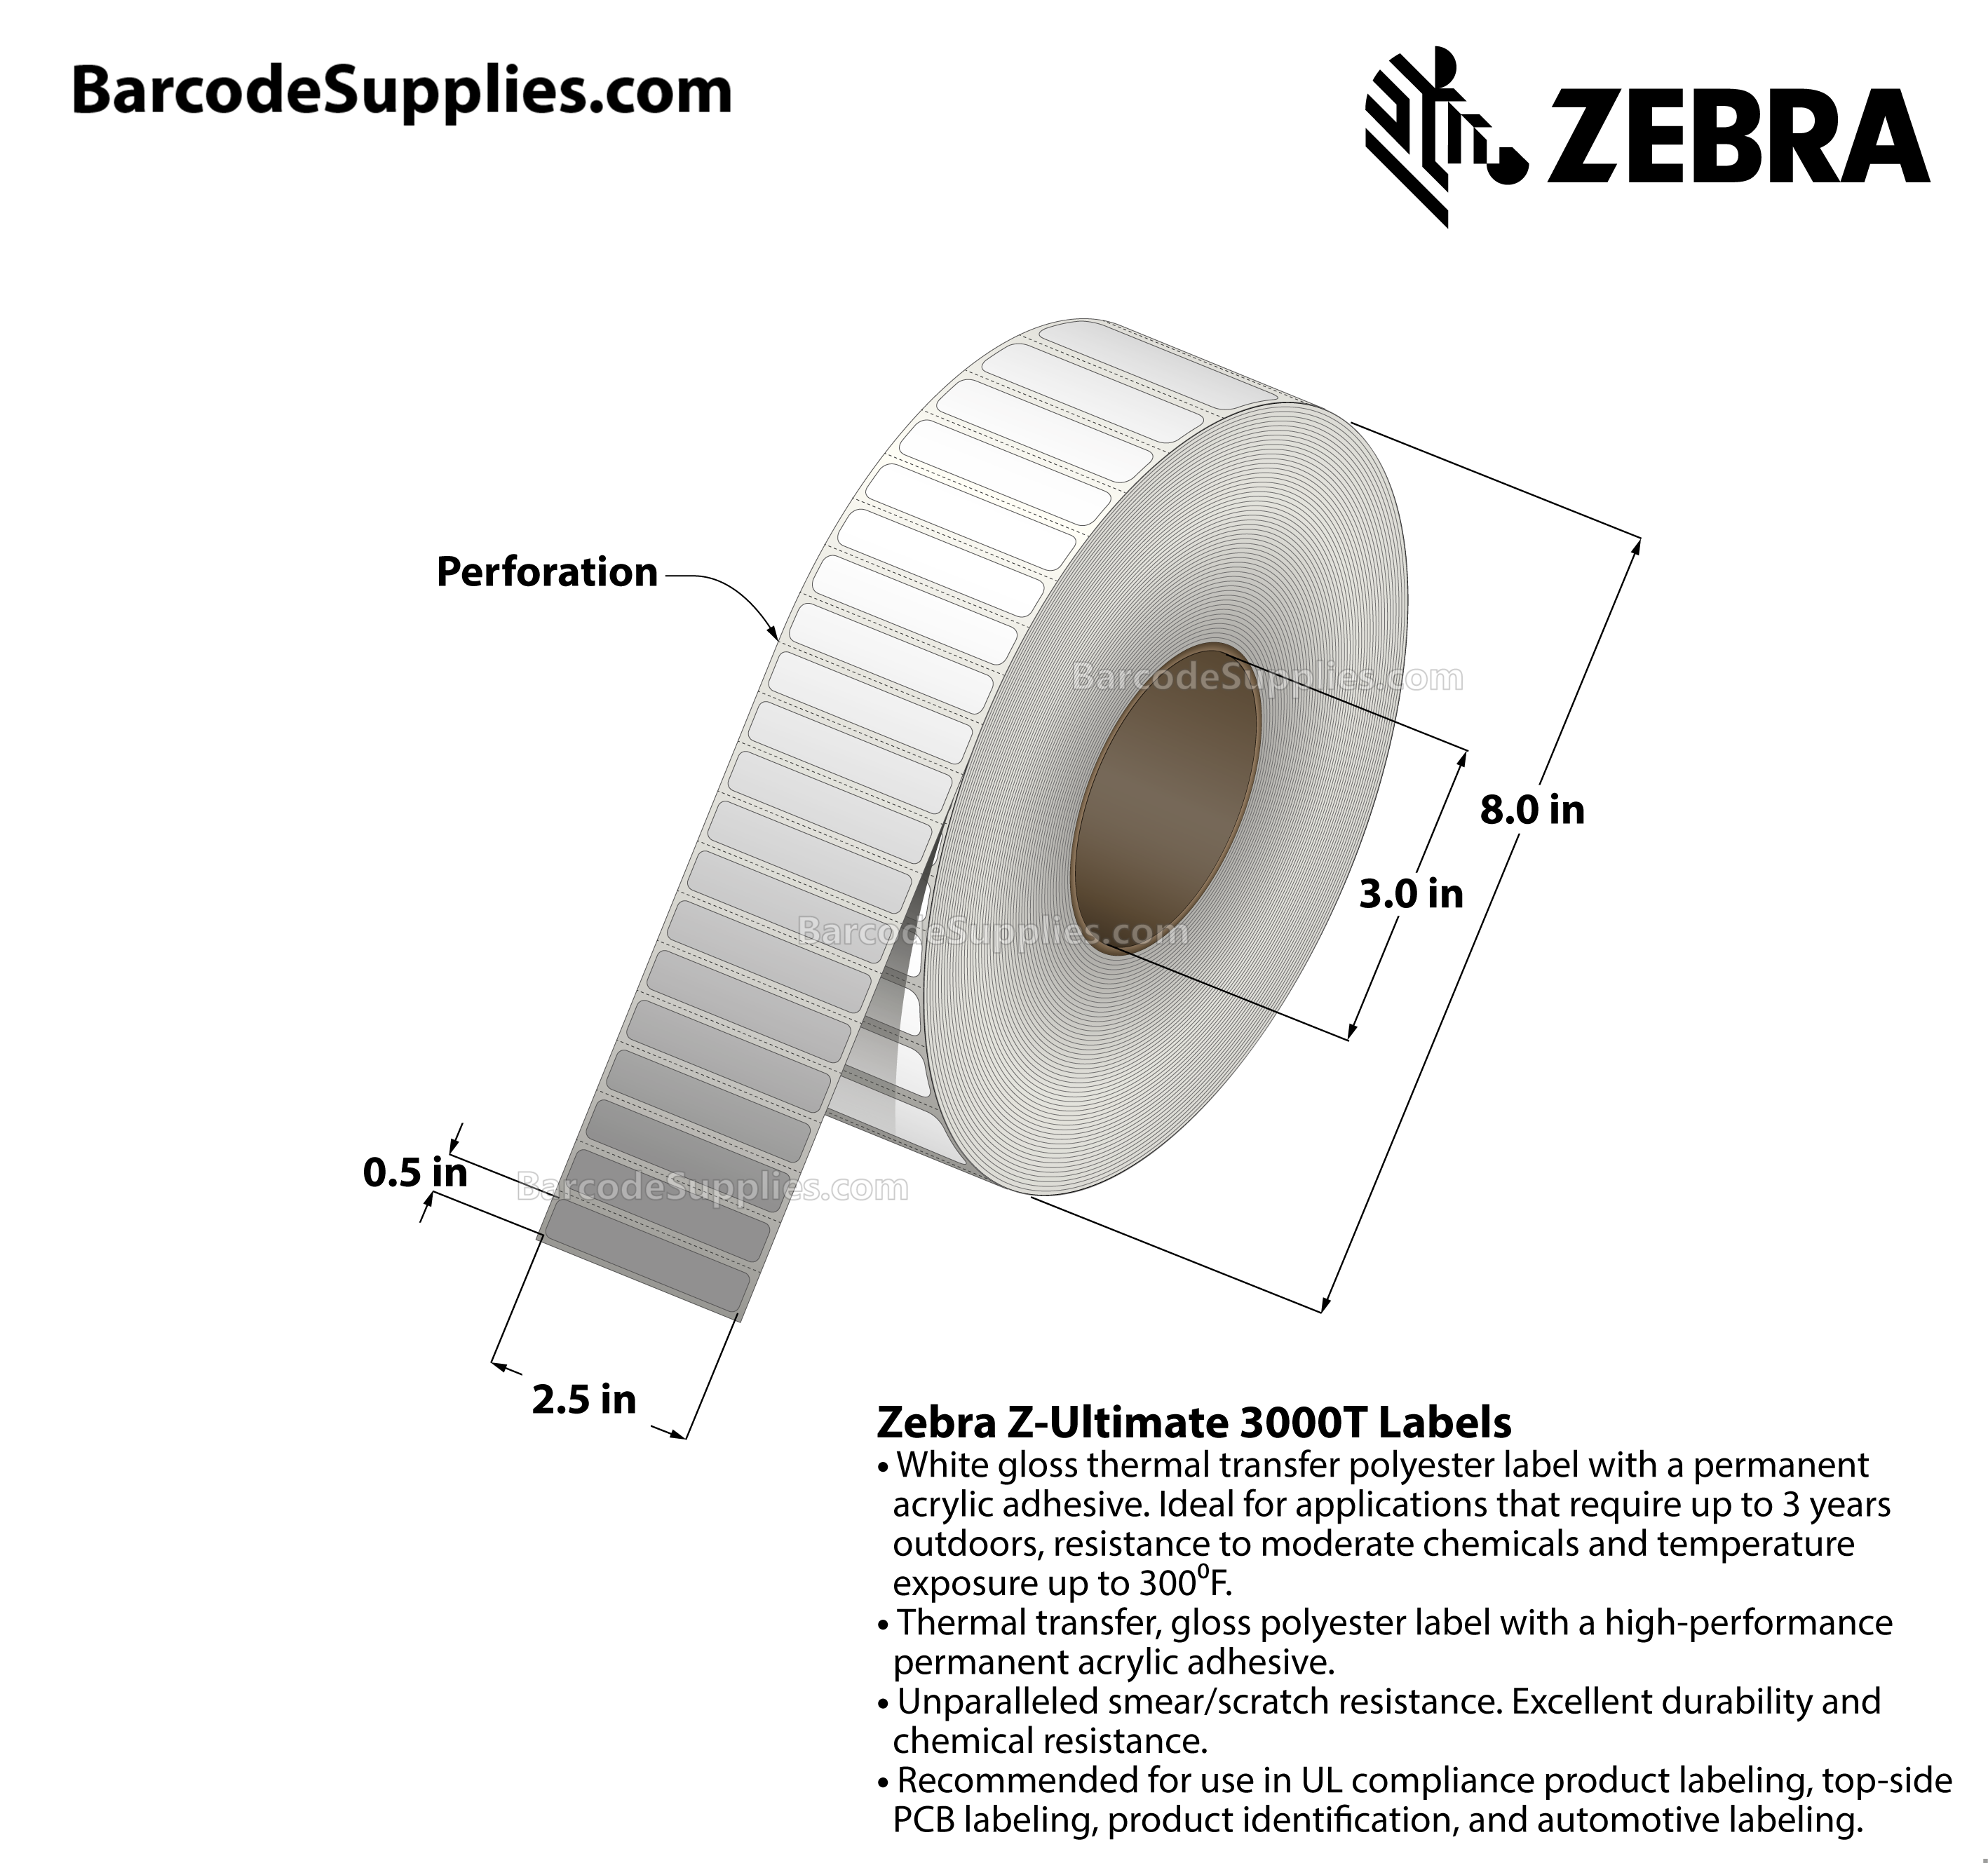 Products 2.5 x 0.5 Thermal Transfer White Z-Ultimate 3000T Labels With Permanent Adhesive - Perforated - 10020 Labels Per Roll - Carton Of 4 Rolls - 40080 Labels Total - MPN: 10011700